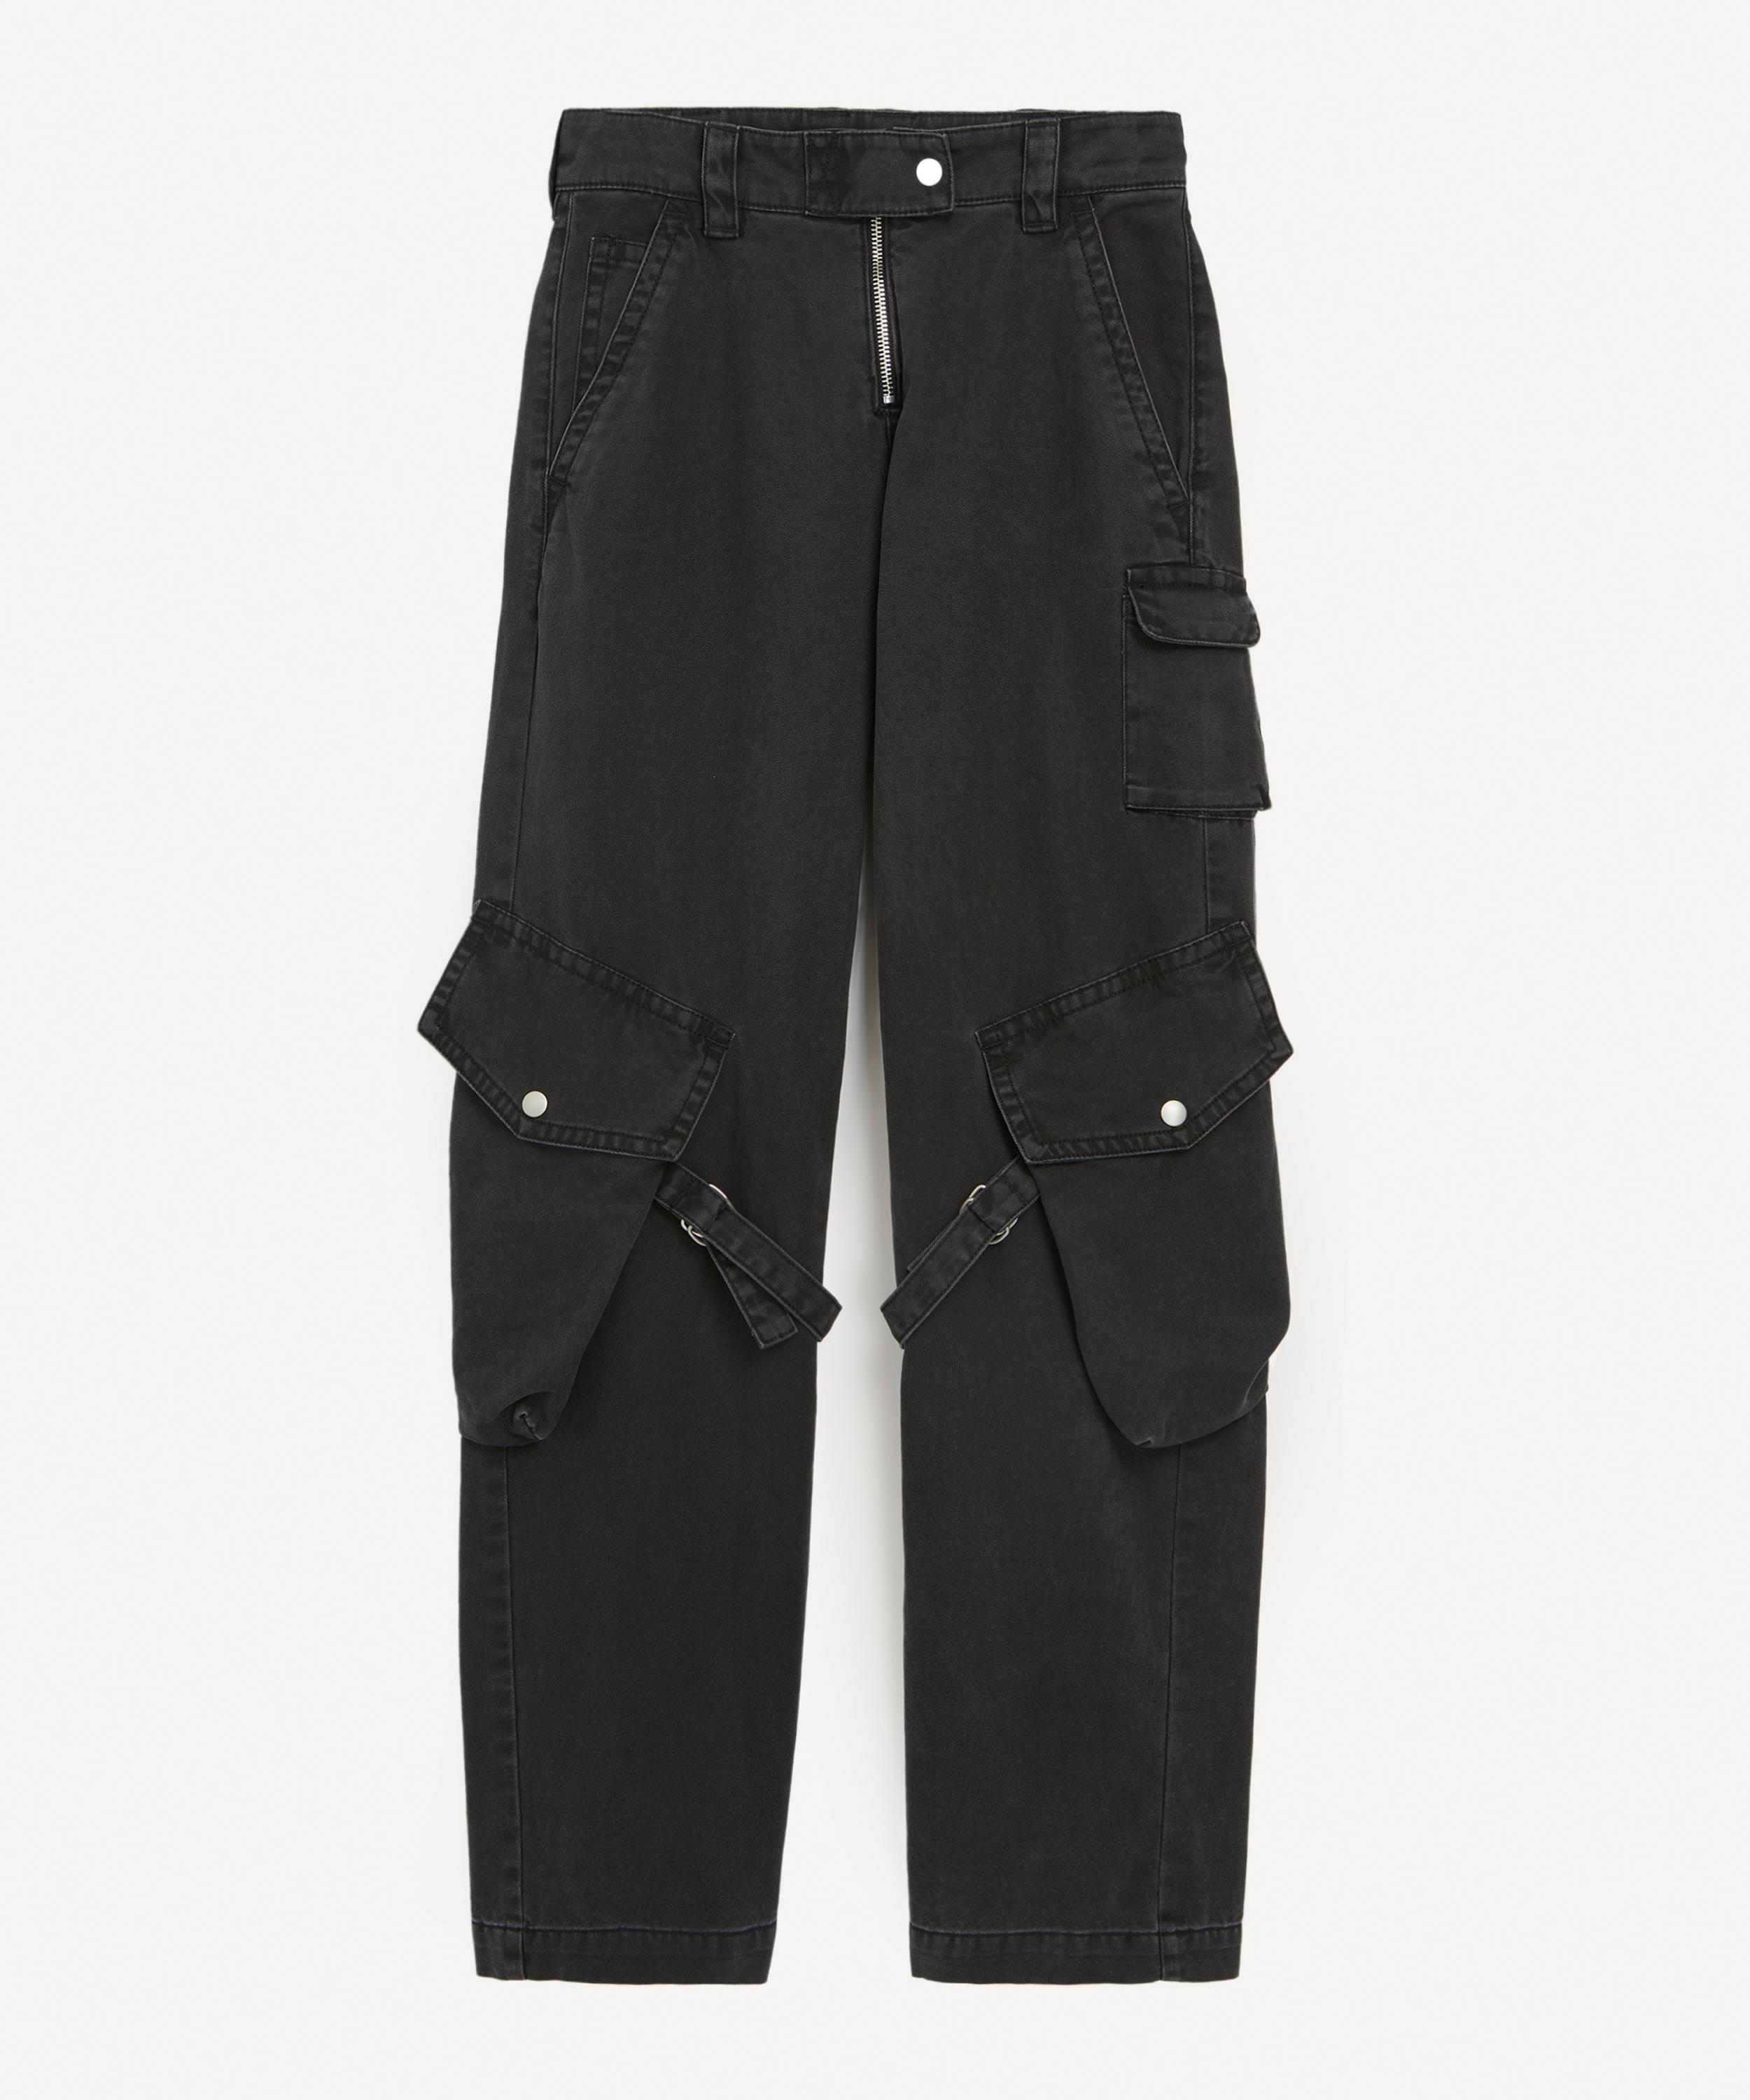 Acne Studios Washed Black Cargo Trousers | Liberty